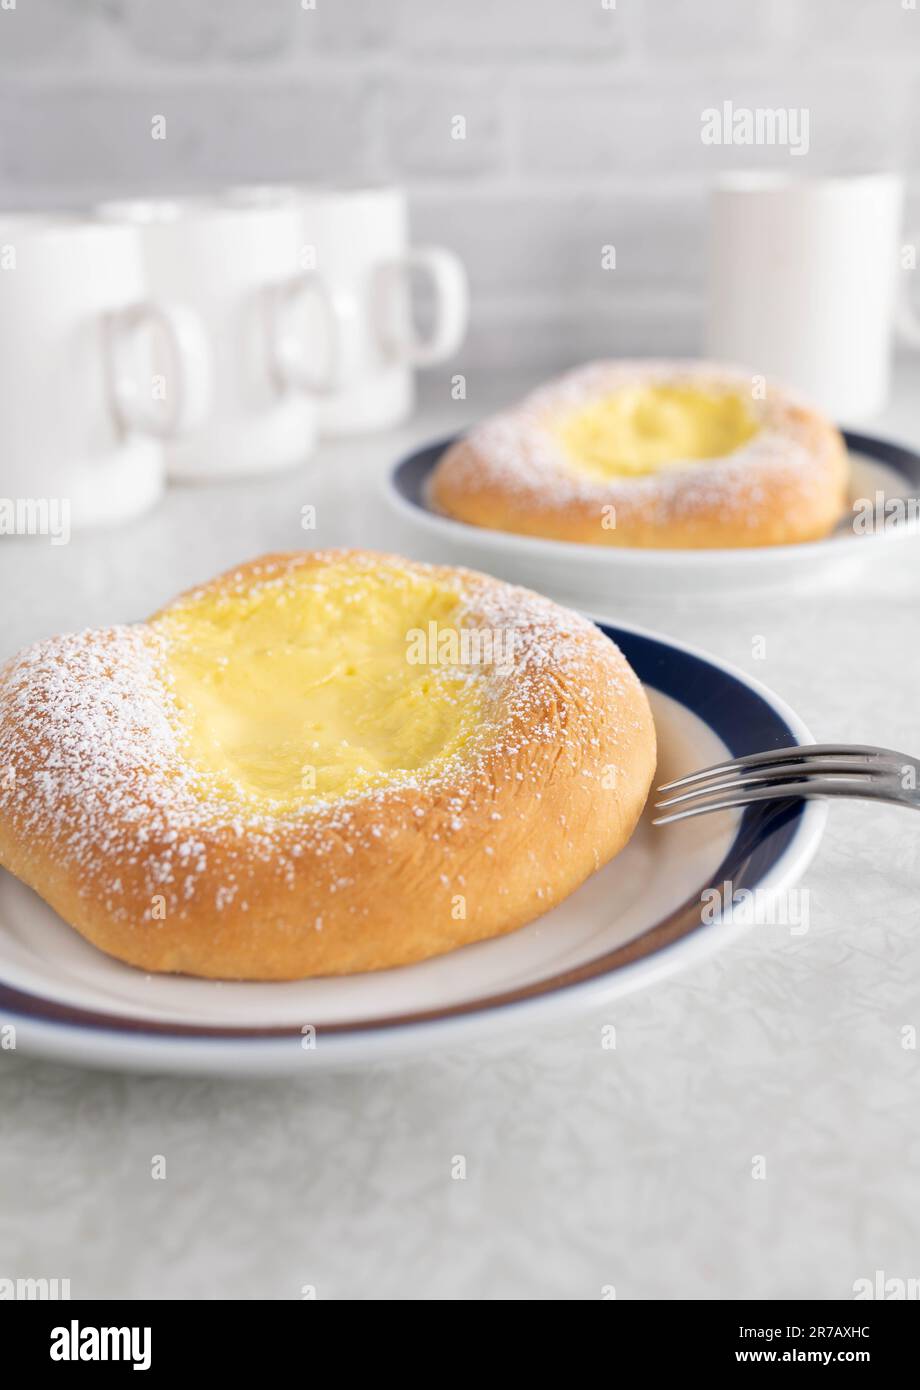 Pastry with pudding filling Stock Photo